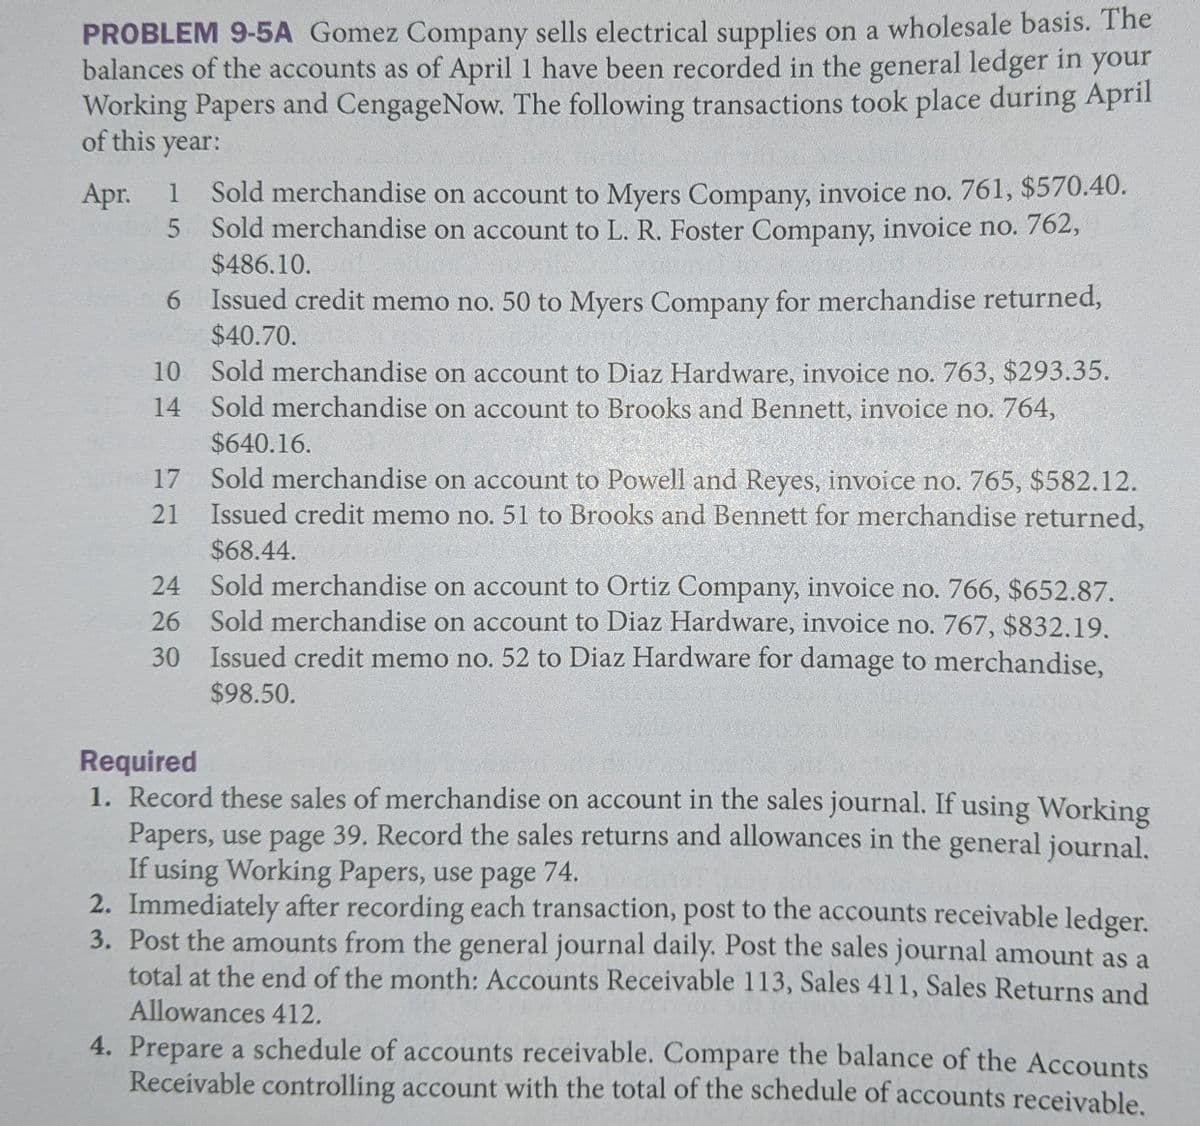 PROBLEM 9-5A Gomez Company sells electrical supplies on a wholesale basis. The
balances of the accounts as of April 1 have been recorded in the general ledger in your
Working Papers and CengageNow. The following transactions took place during April
of this year:
Sold merchandise on account to Myers Company, invoice no. 761, $570.40.
5 Sold merchandise on account to L. R. Foster Company, invoice no. 762,
$486.10.
Apr.
1
6 Issued credit memo no. 50 to Myers Company for merchandise returned,
$40.70.
10 Sold merchandise on account to Diaz Hardware, invoice no. 763, $293.35.
14 Sold merchandise on account to Brooks and Bennett, invoice no. 764,
$640.16.
17 Sold merchandise on account to Powell and Reyes, invoice no. 765, $582.12.
Issued credit memo no. 51 to Brooks and Bennett for merchandise returned,
$68.44.
24 Sold merchandise on account to Ortiz Company, invoice no. 766, $652.87.
26 Sold merchandise on account to Diaz Hardware, invoice no. 767, $832.19.
30 Issued credit memo no. 52 to Diaz Hardware for damage to merchandise,
21
$98.50.
Required
1. Record these sales of merchandise on account in the sales journal. If using Working
Papers, use page 39. Record the sales returns and allowances in the general journal.
If using Working Papers, use page 74.
2. Immediately after recording each transaction, post to the accounts receivable ledger.
3. Post the amounts from the general journal daily. Post the sales journal amount as a
total at the end of the month: Accounts Receivable 113, Sales 411, Sales Returns and
Allowances 412.
4. Prepare a schedule of accounts receivable. Compare the balance of the Accounts
Receivable controlling account with the total of the schedule of accounts receivable.
